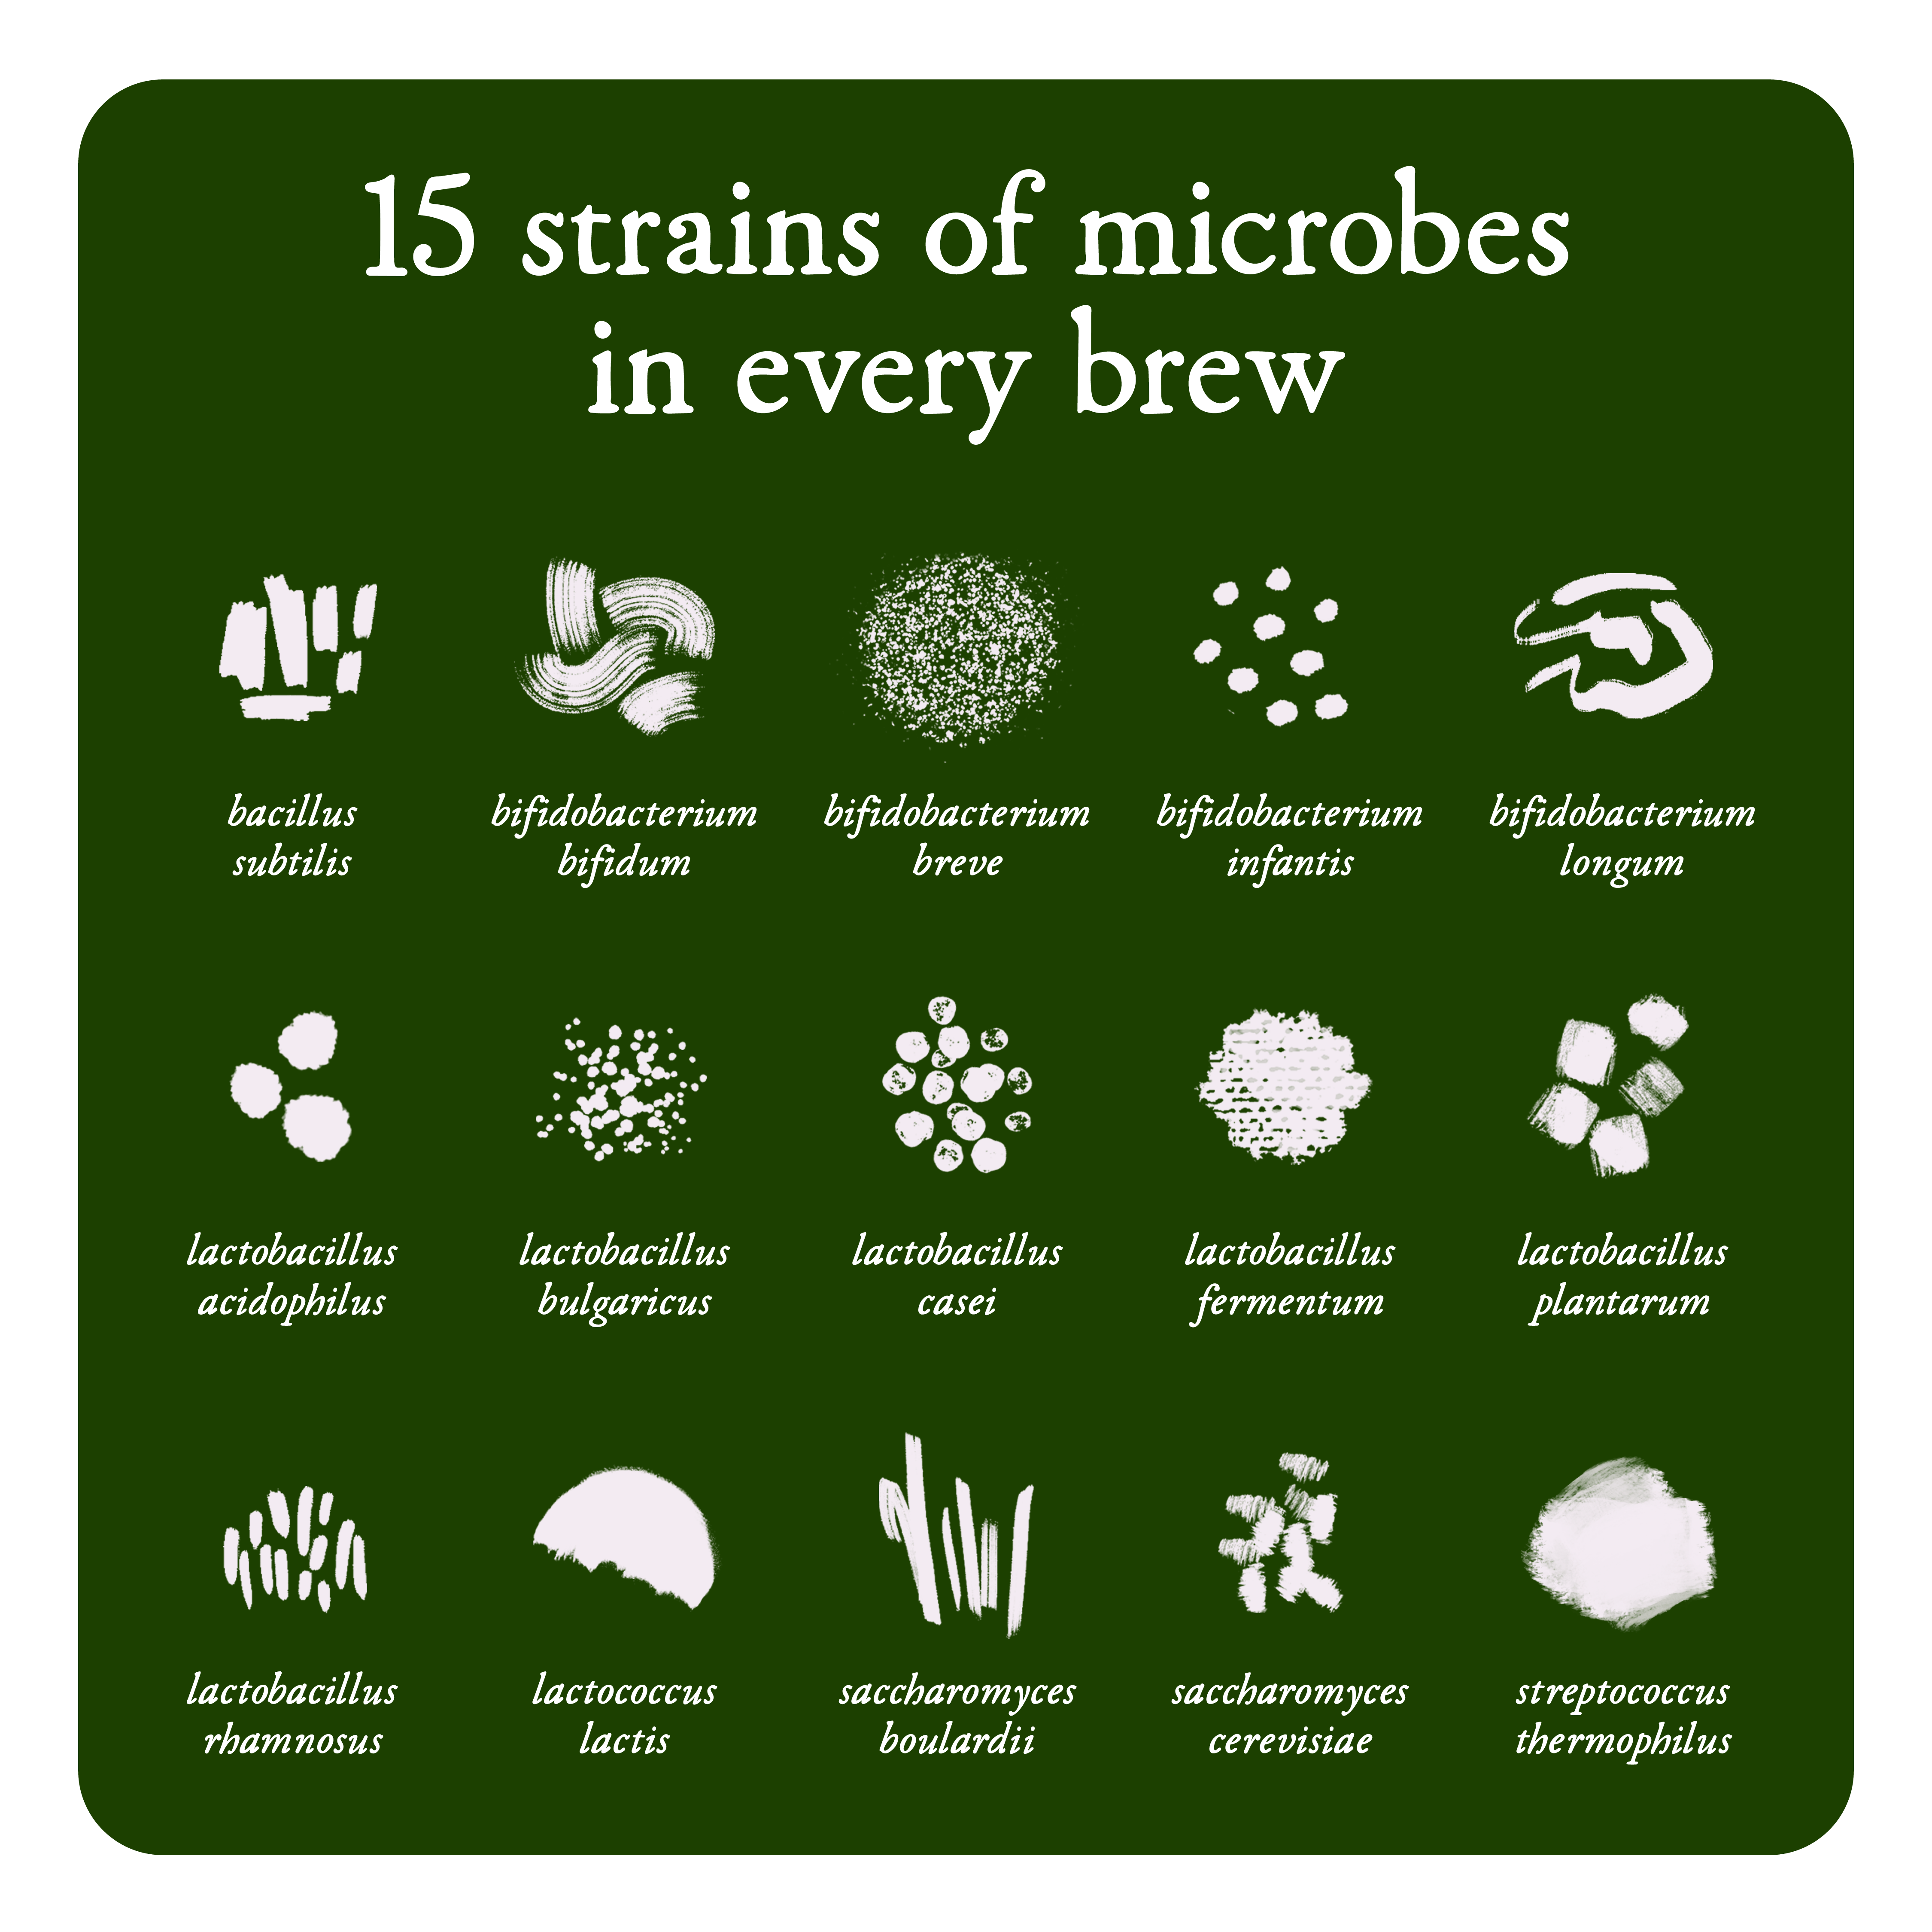 15 strains of microbes in every brew, illustration of microbz 15 strains of microbes 